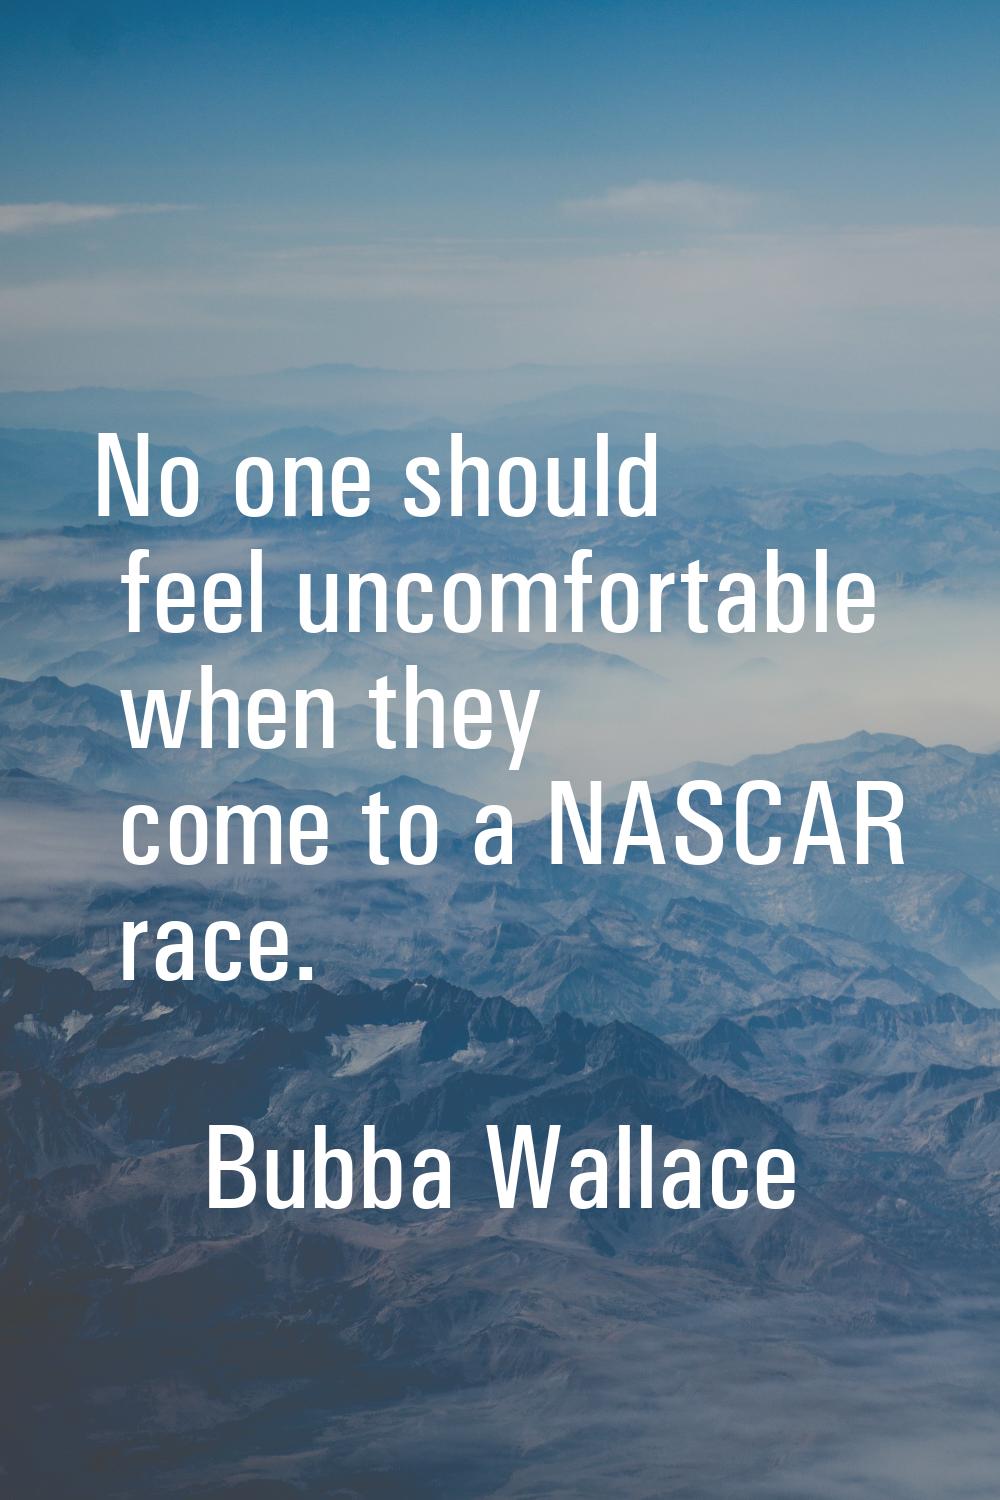 No one should feel uncomfortable when they come to a NASCAR race.